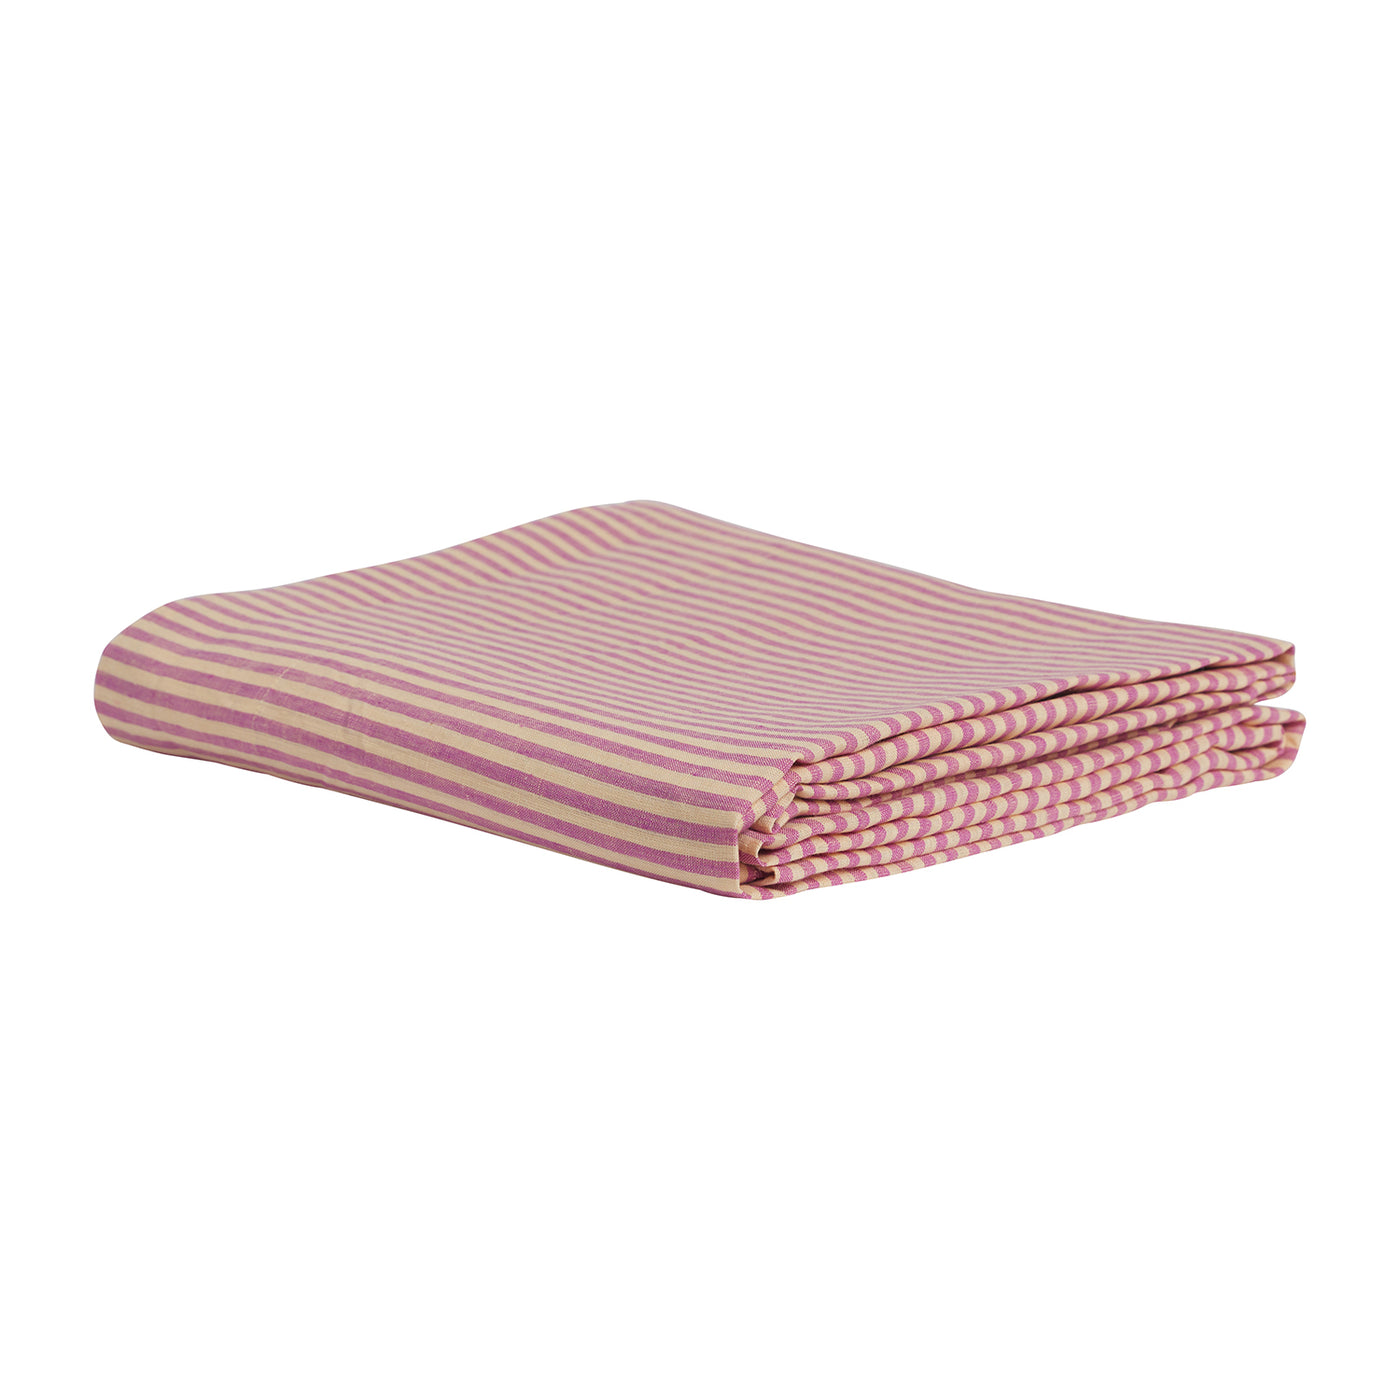 Lyme Linen Fitted Sheet - Orchid Cot